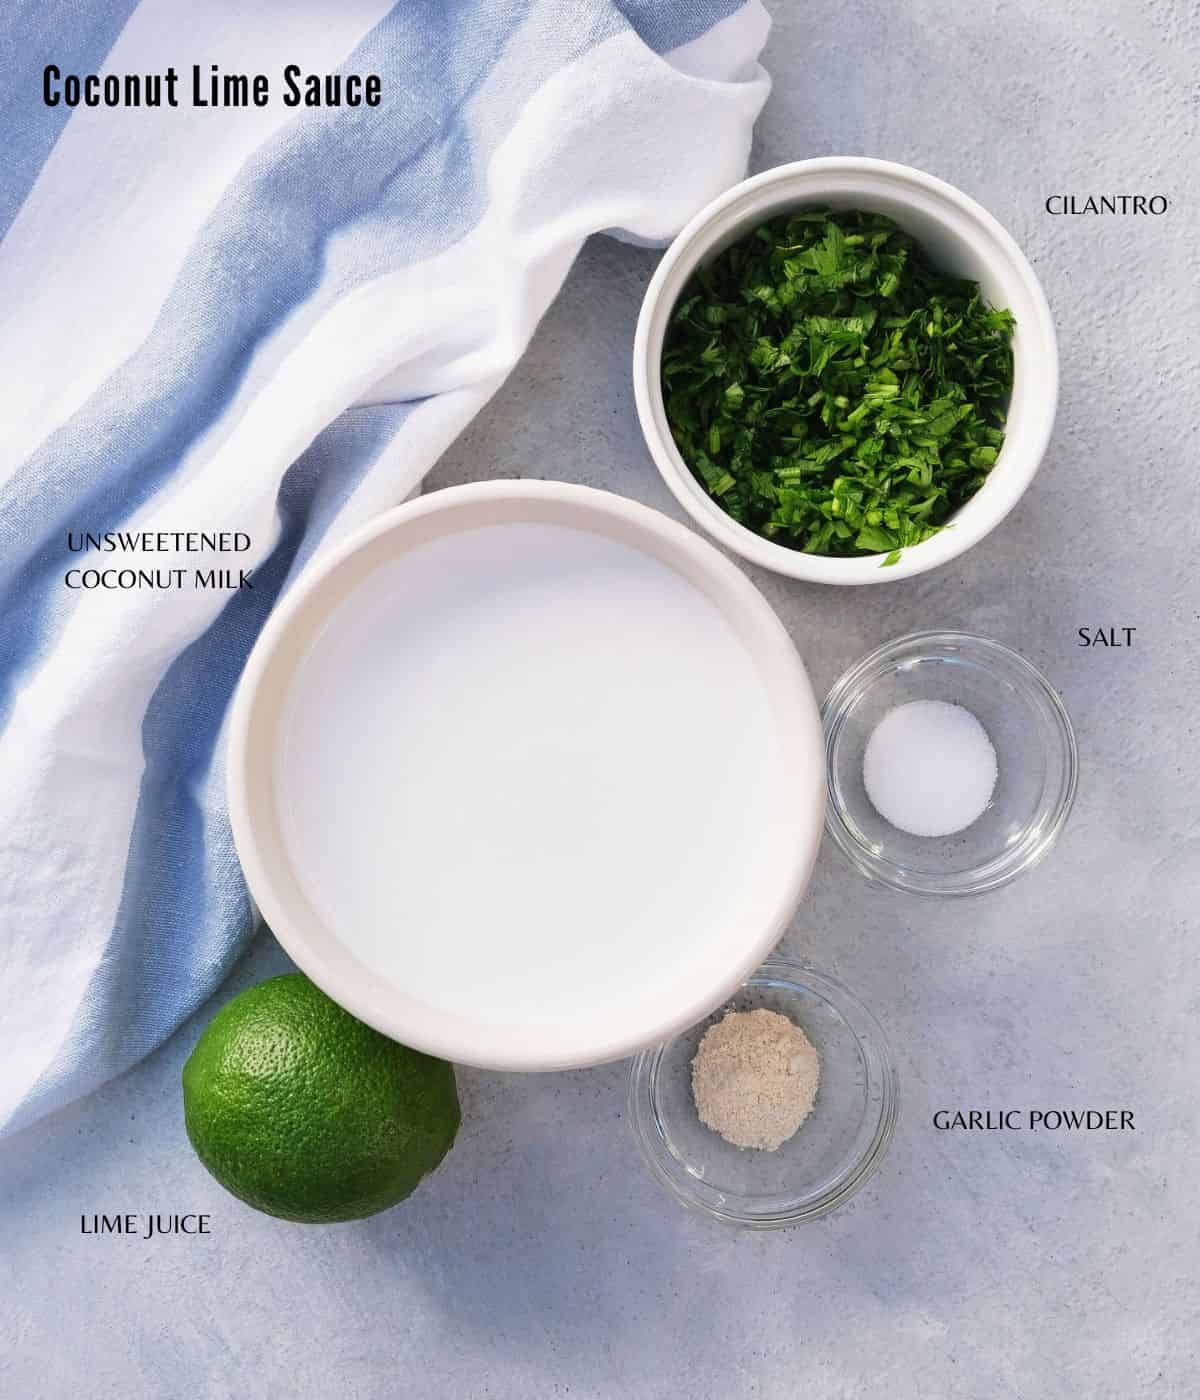 Coconut lime sauce ingredients.